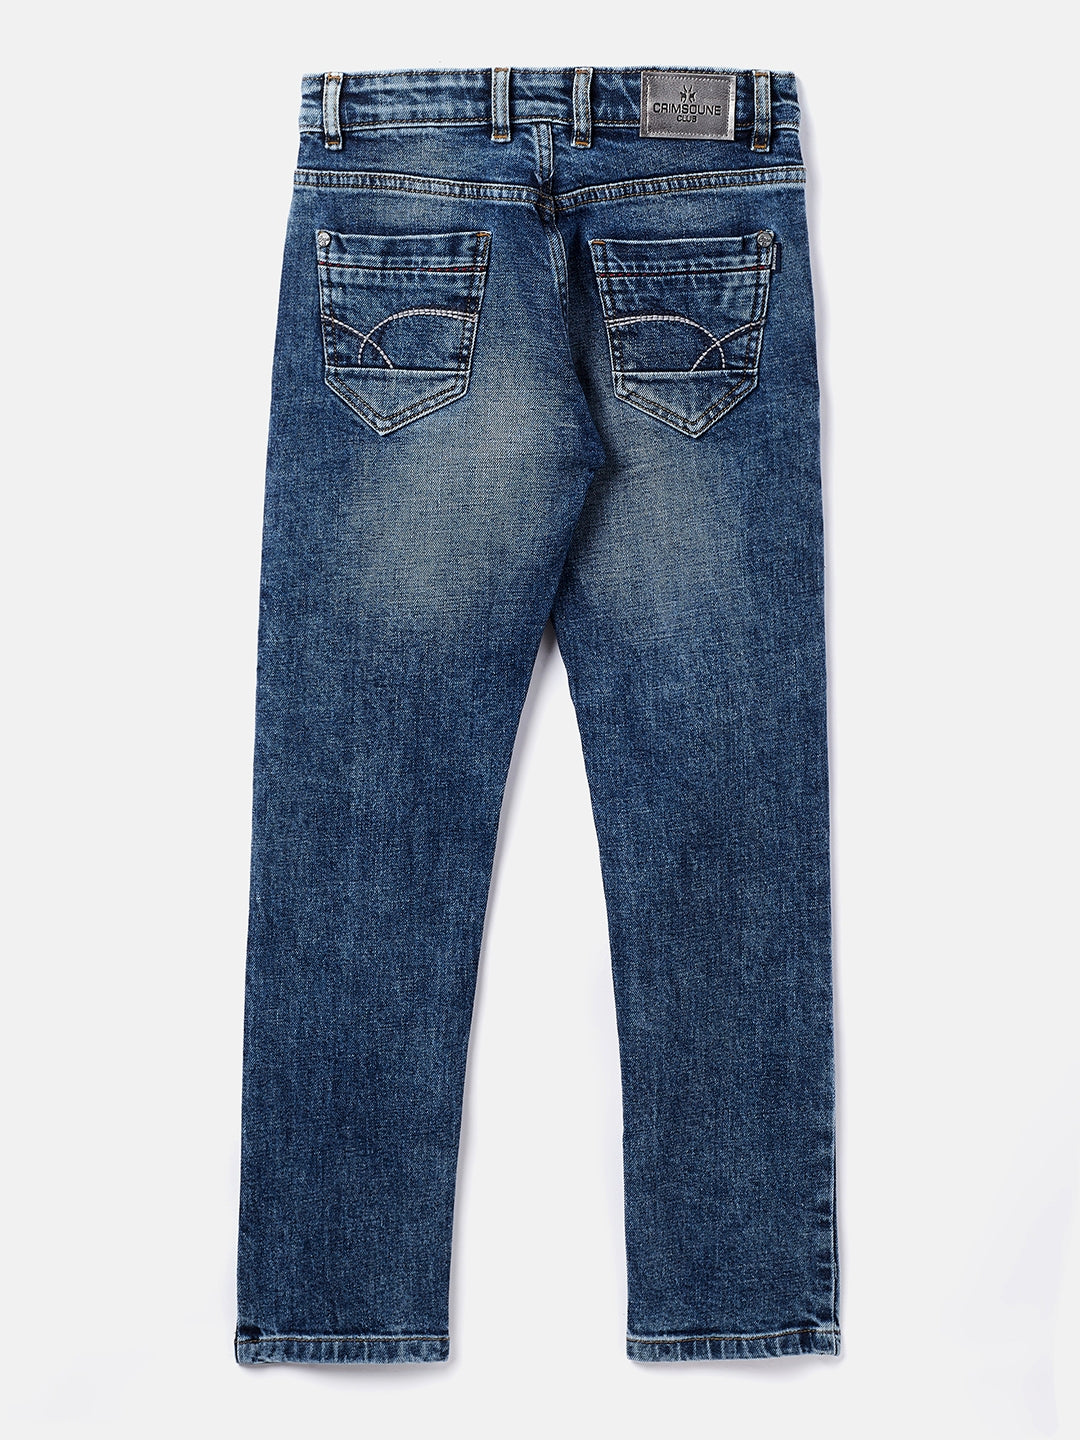 Blue Washed Jeans - Boys Jeans